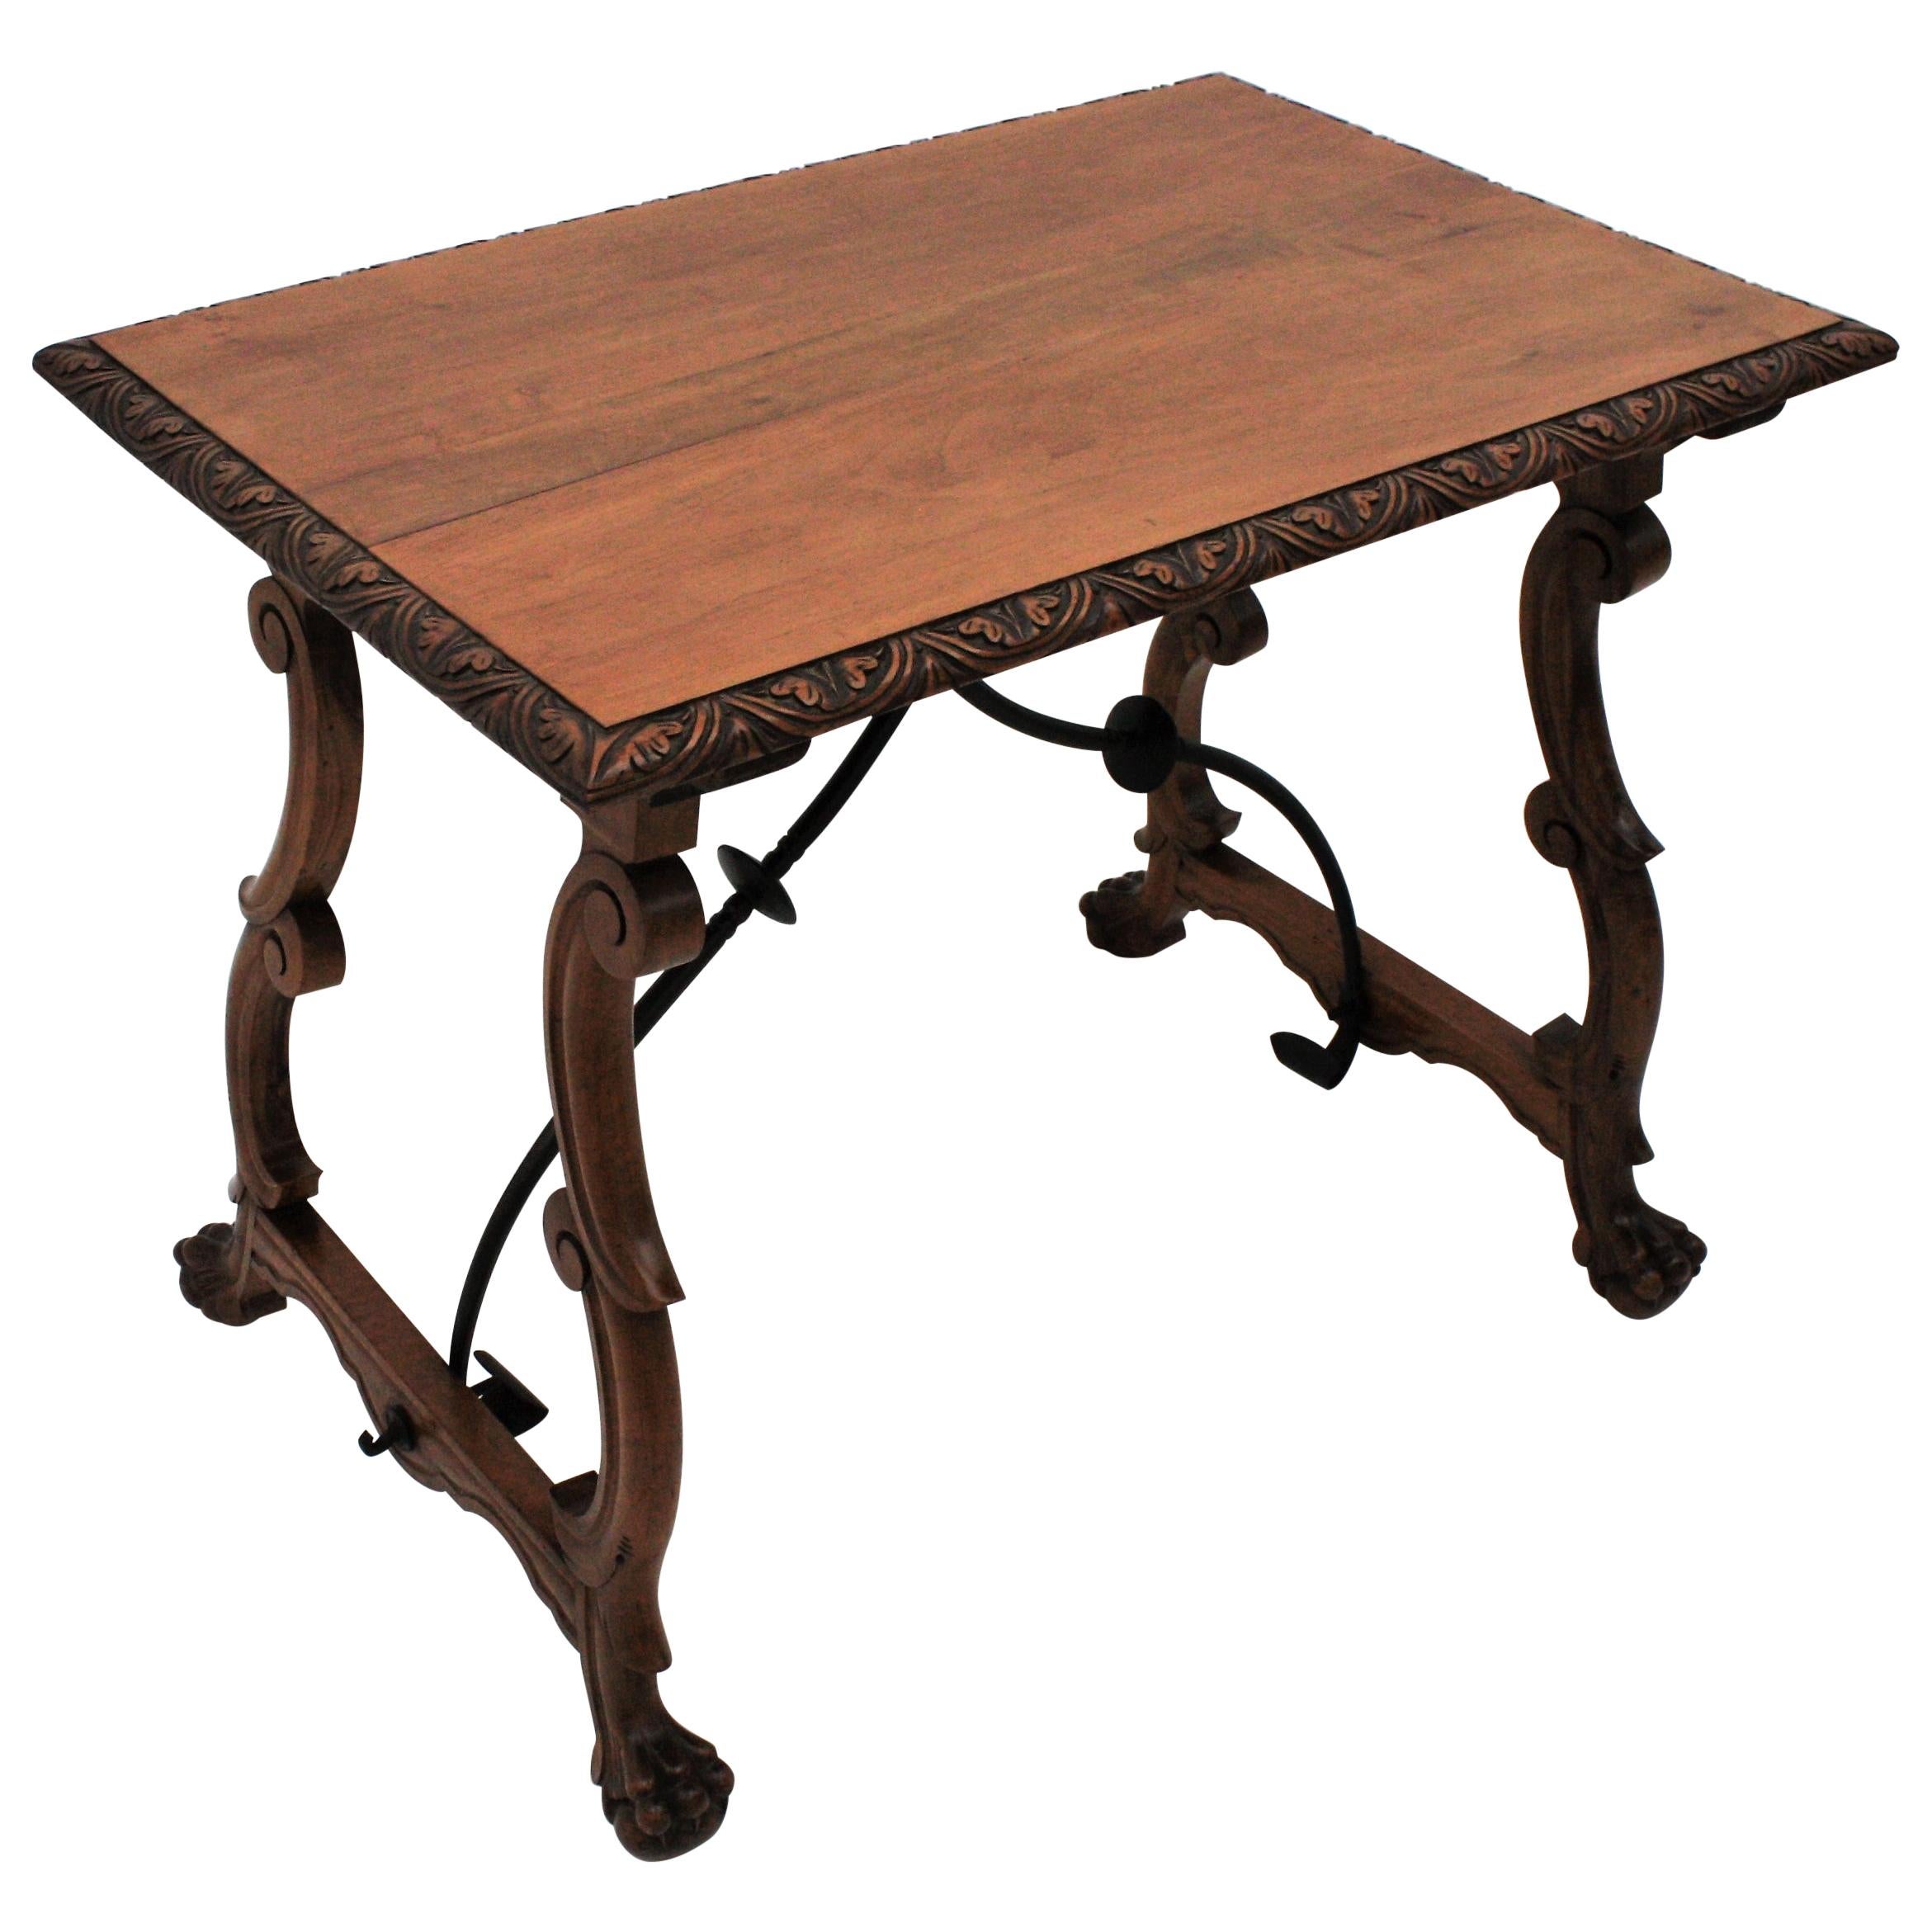 Spanish Baroque Fratino Table in Walnut Wood and Iron Stretchers